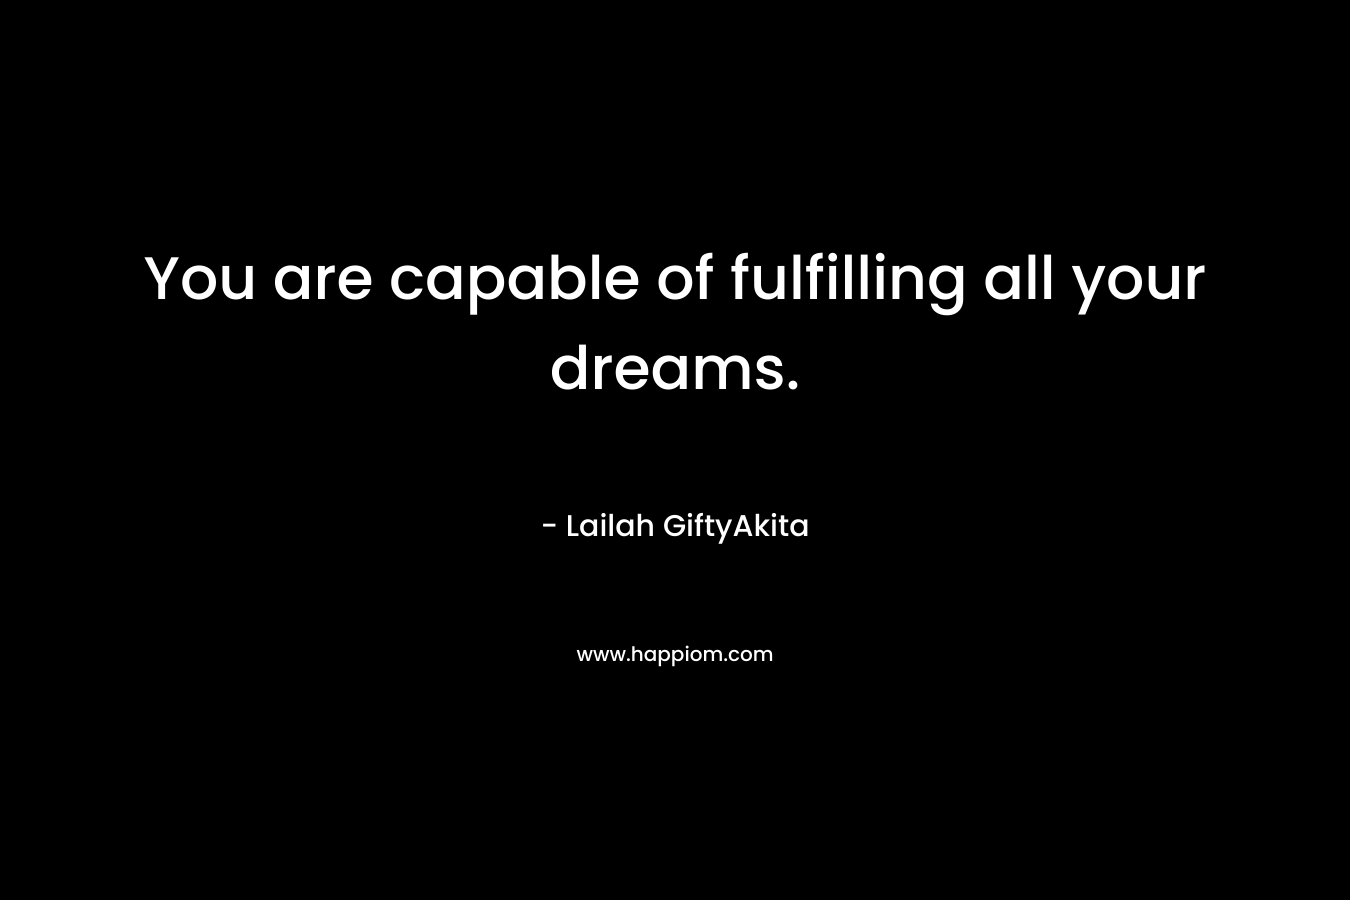 You are capable of fulfilling all your dreams. – Lailah GiftyAkita